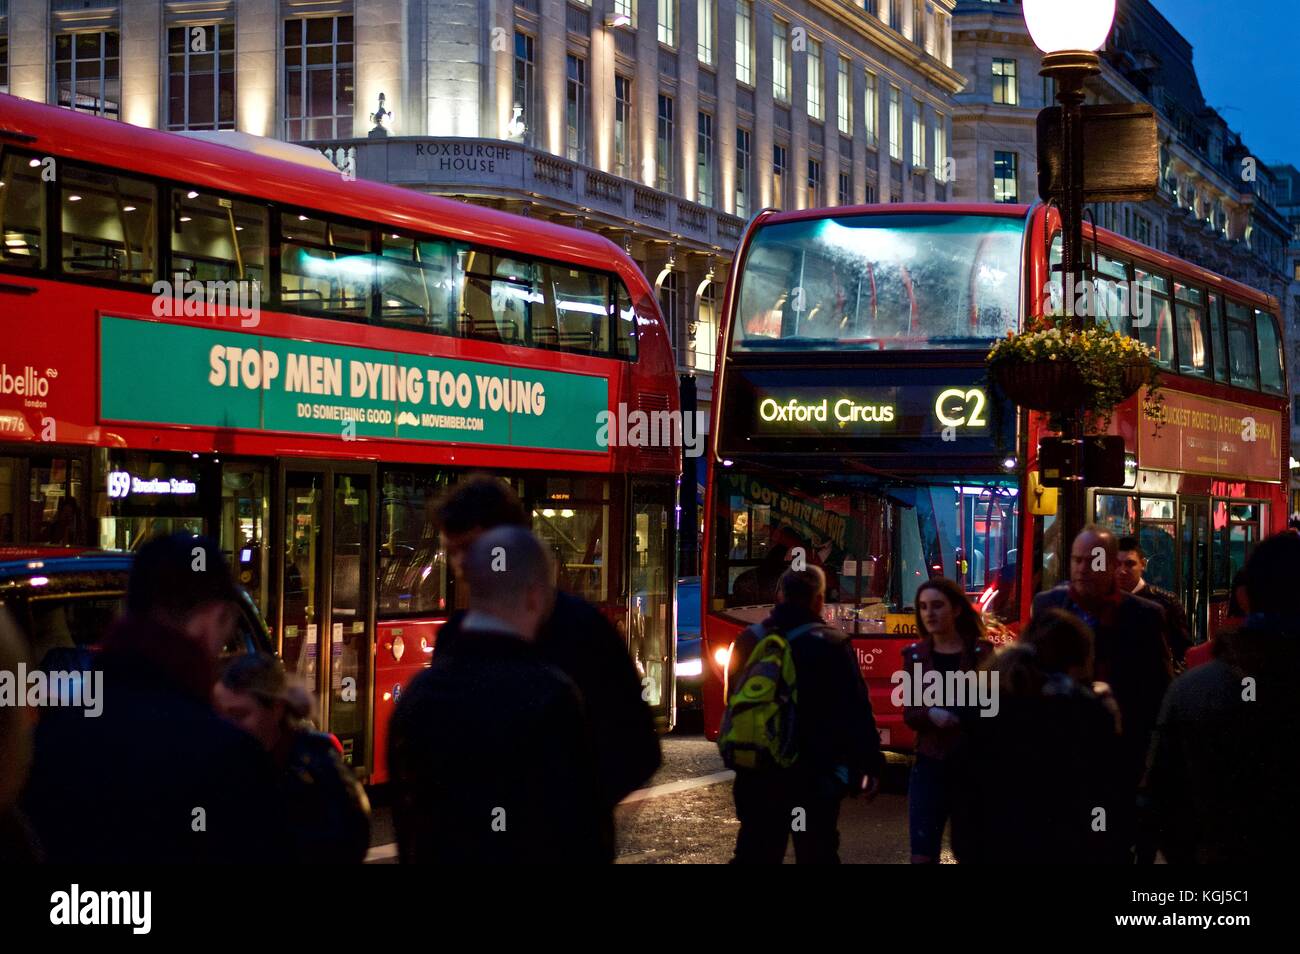 C2 Bus to Oxford Circus behind another bus with prostate cancer advert, Regent Street, London, UK, 2017 Stock Photo